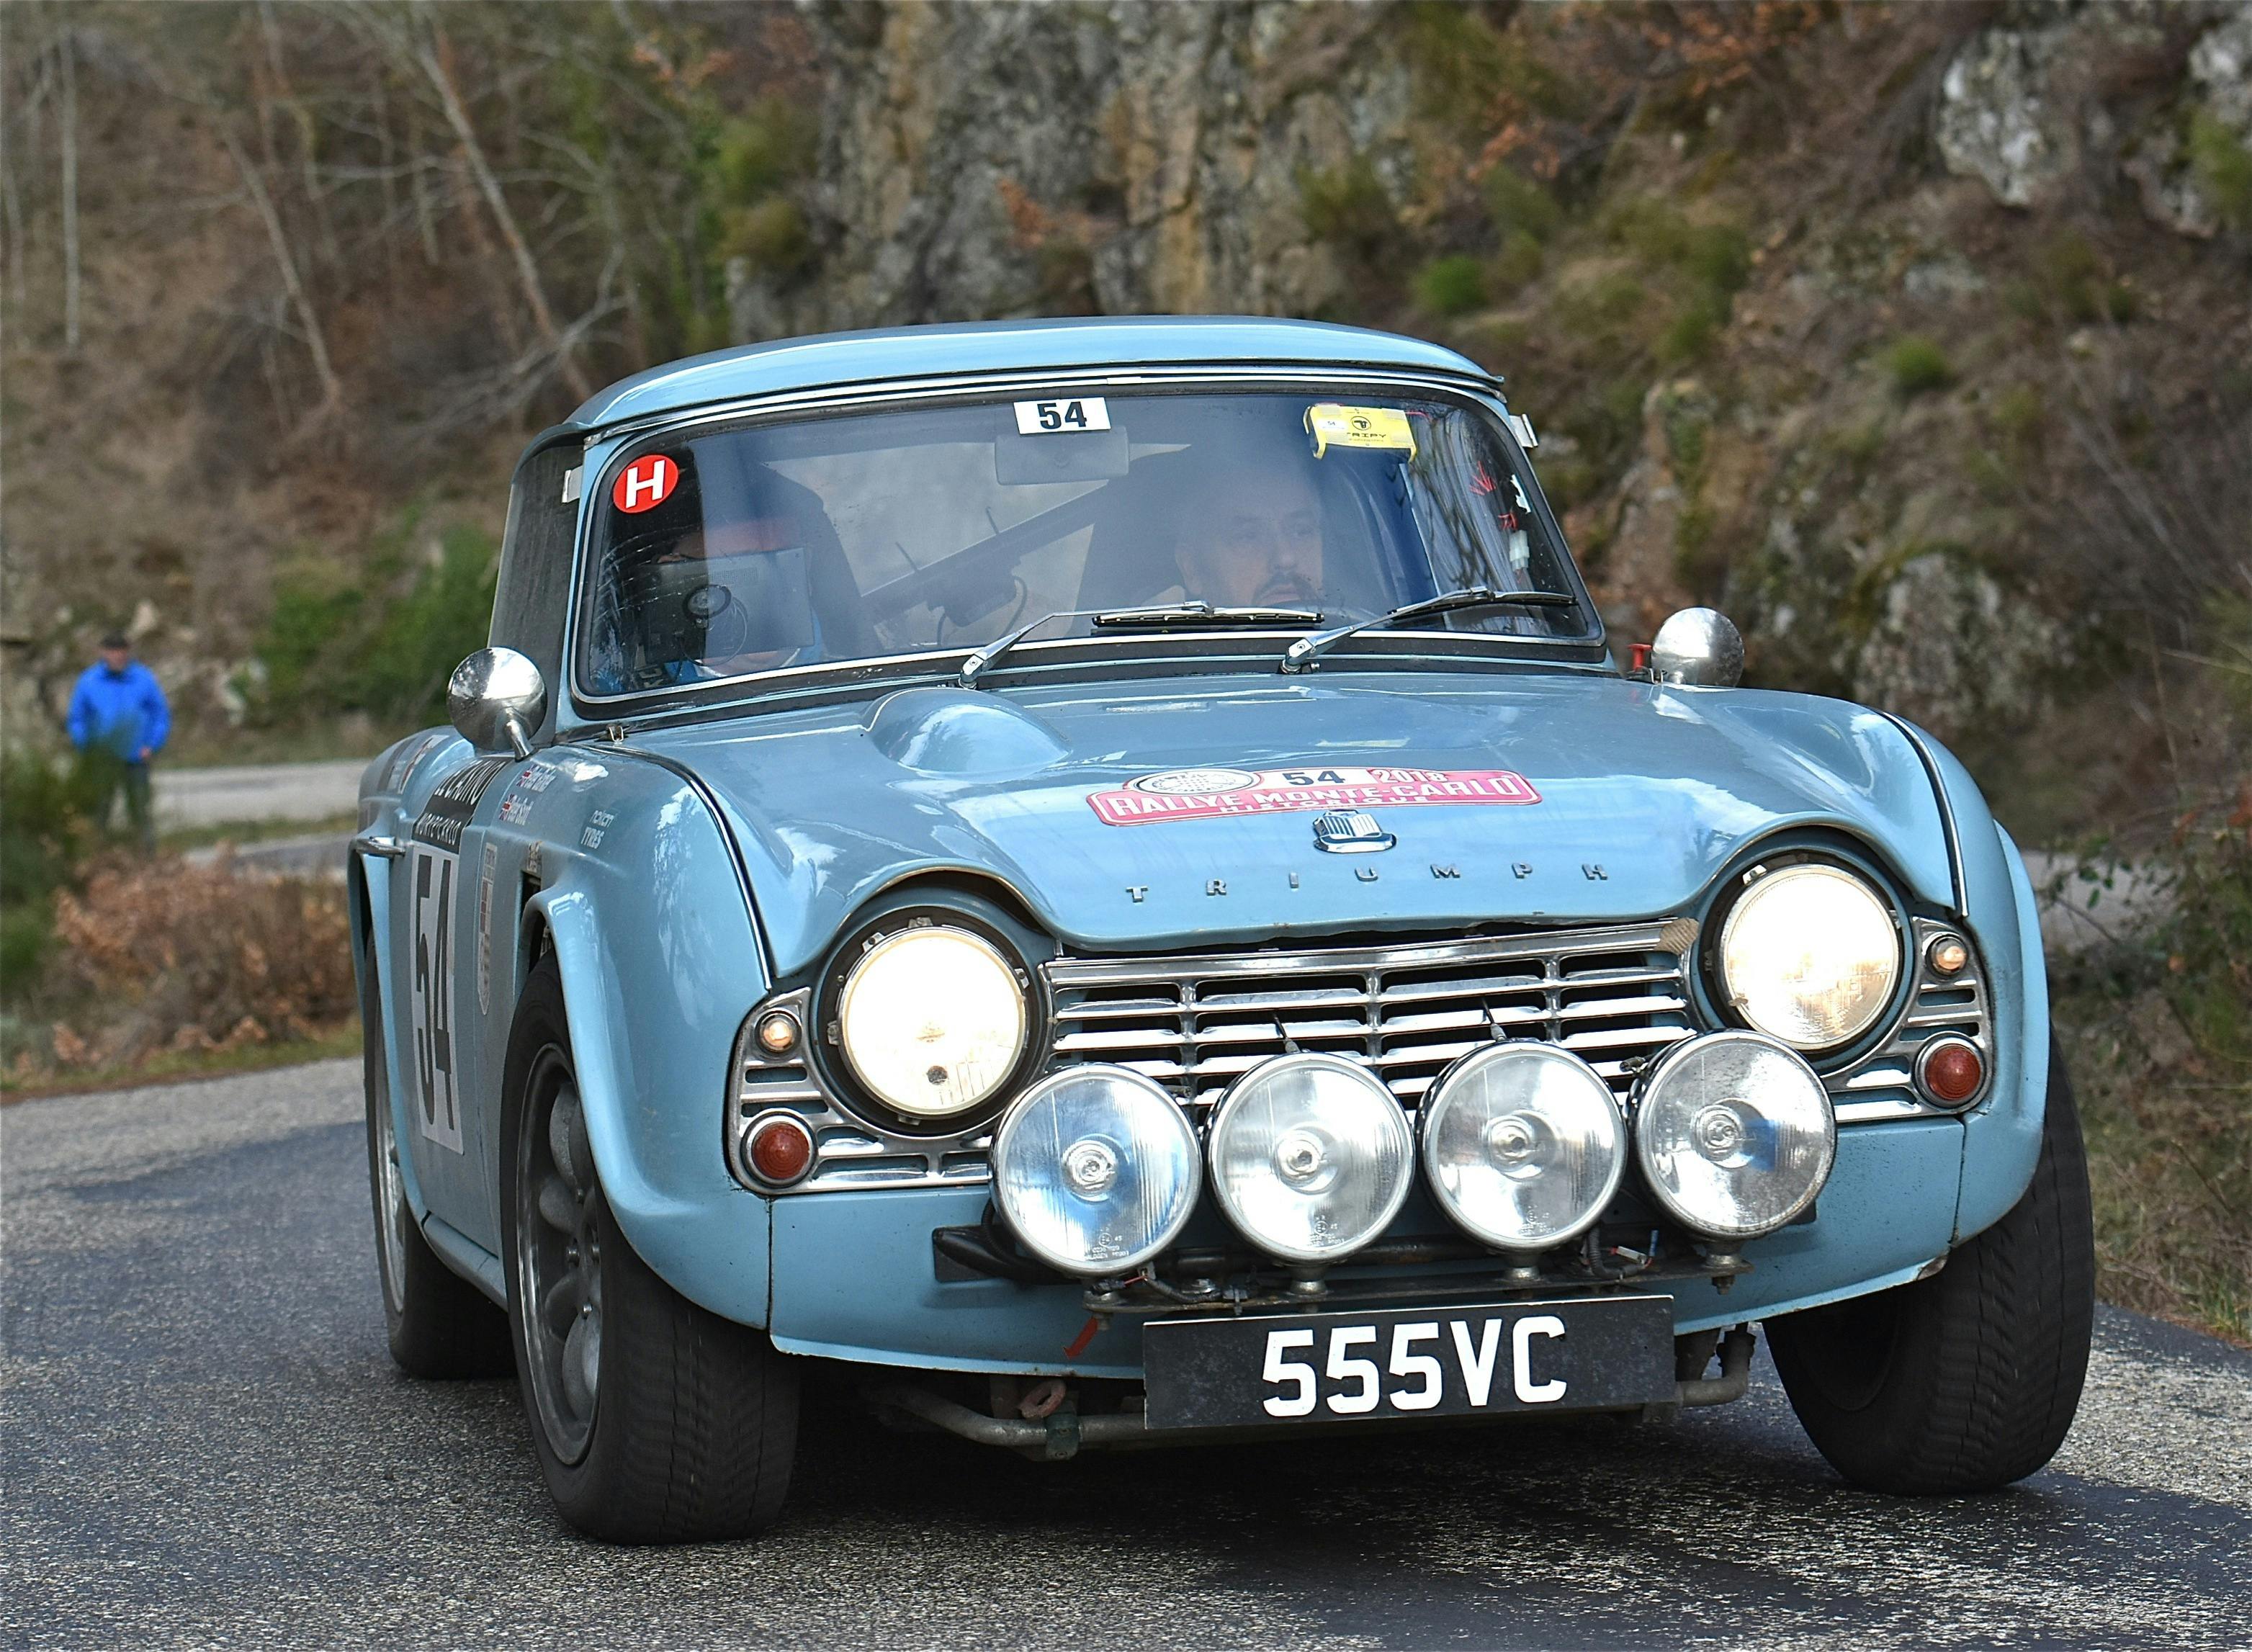 Peter Barker and navigator Peter Scott in Peter_s 1963 Triumph TR4 on the 2018 Rallye Monte Carlo Historique - They finished 125th overall (from 340 starters) and 3rd British national team car on the event - Image by Retrospeed